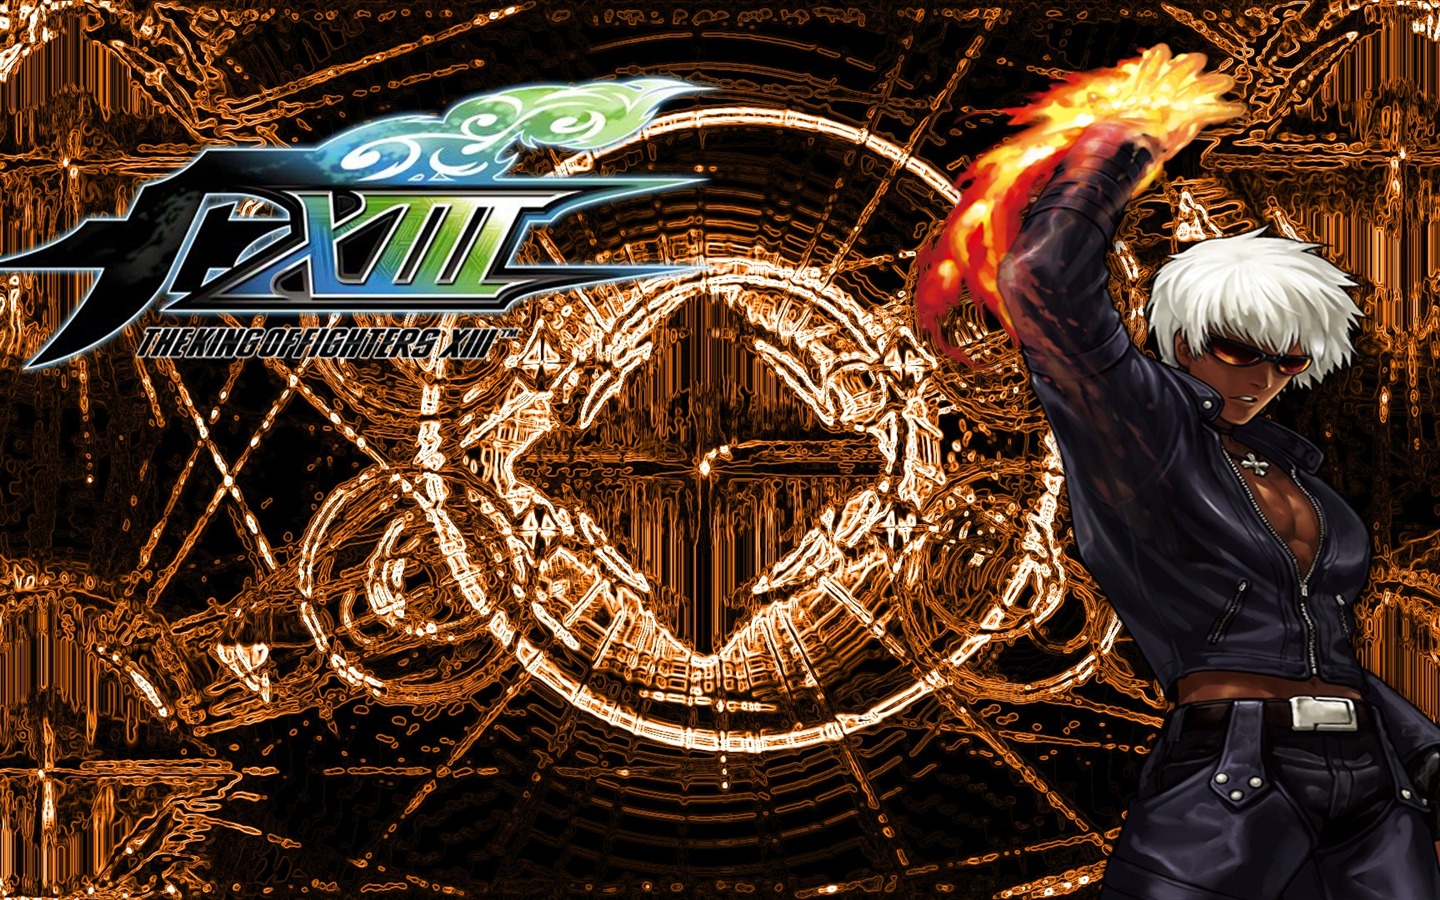 The King of Fighters XIII 拳皇13 壁纸专辑8 - 1440x900